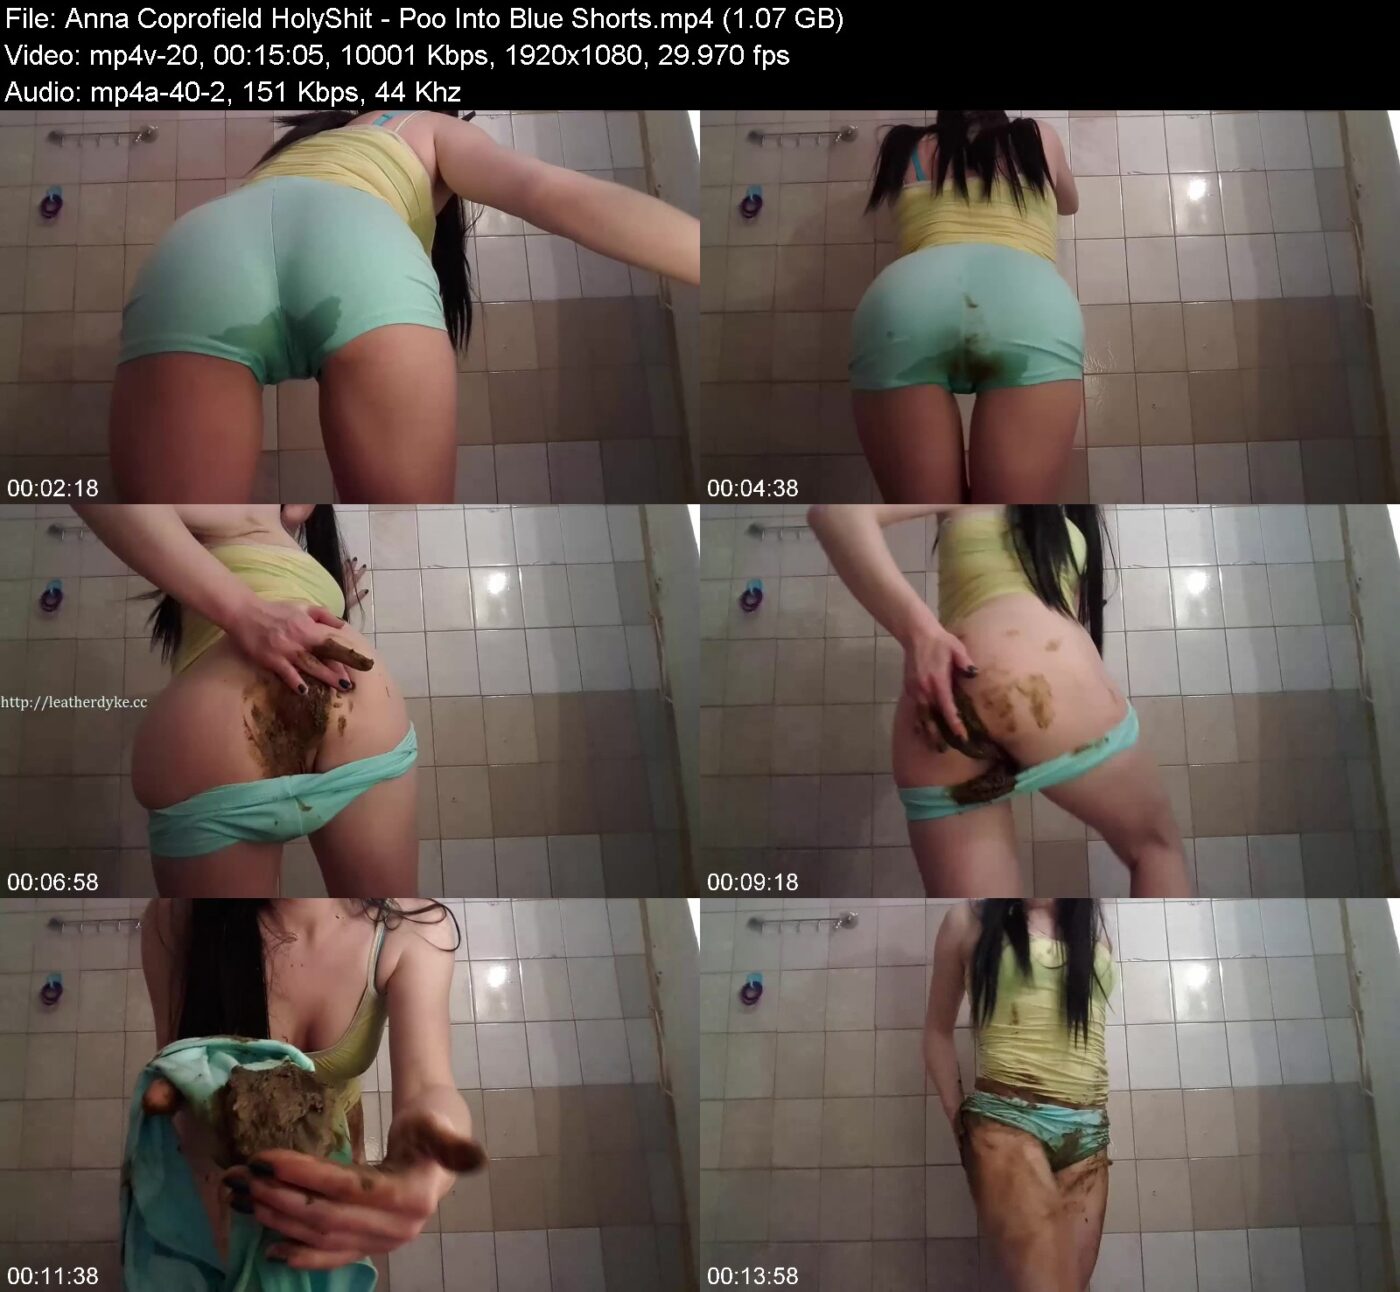 Actress: Anna Coprofield HolyShit. Title and Studio: Poo Into Blue Shorts